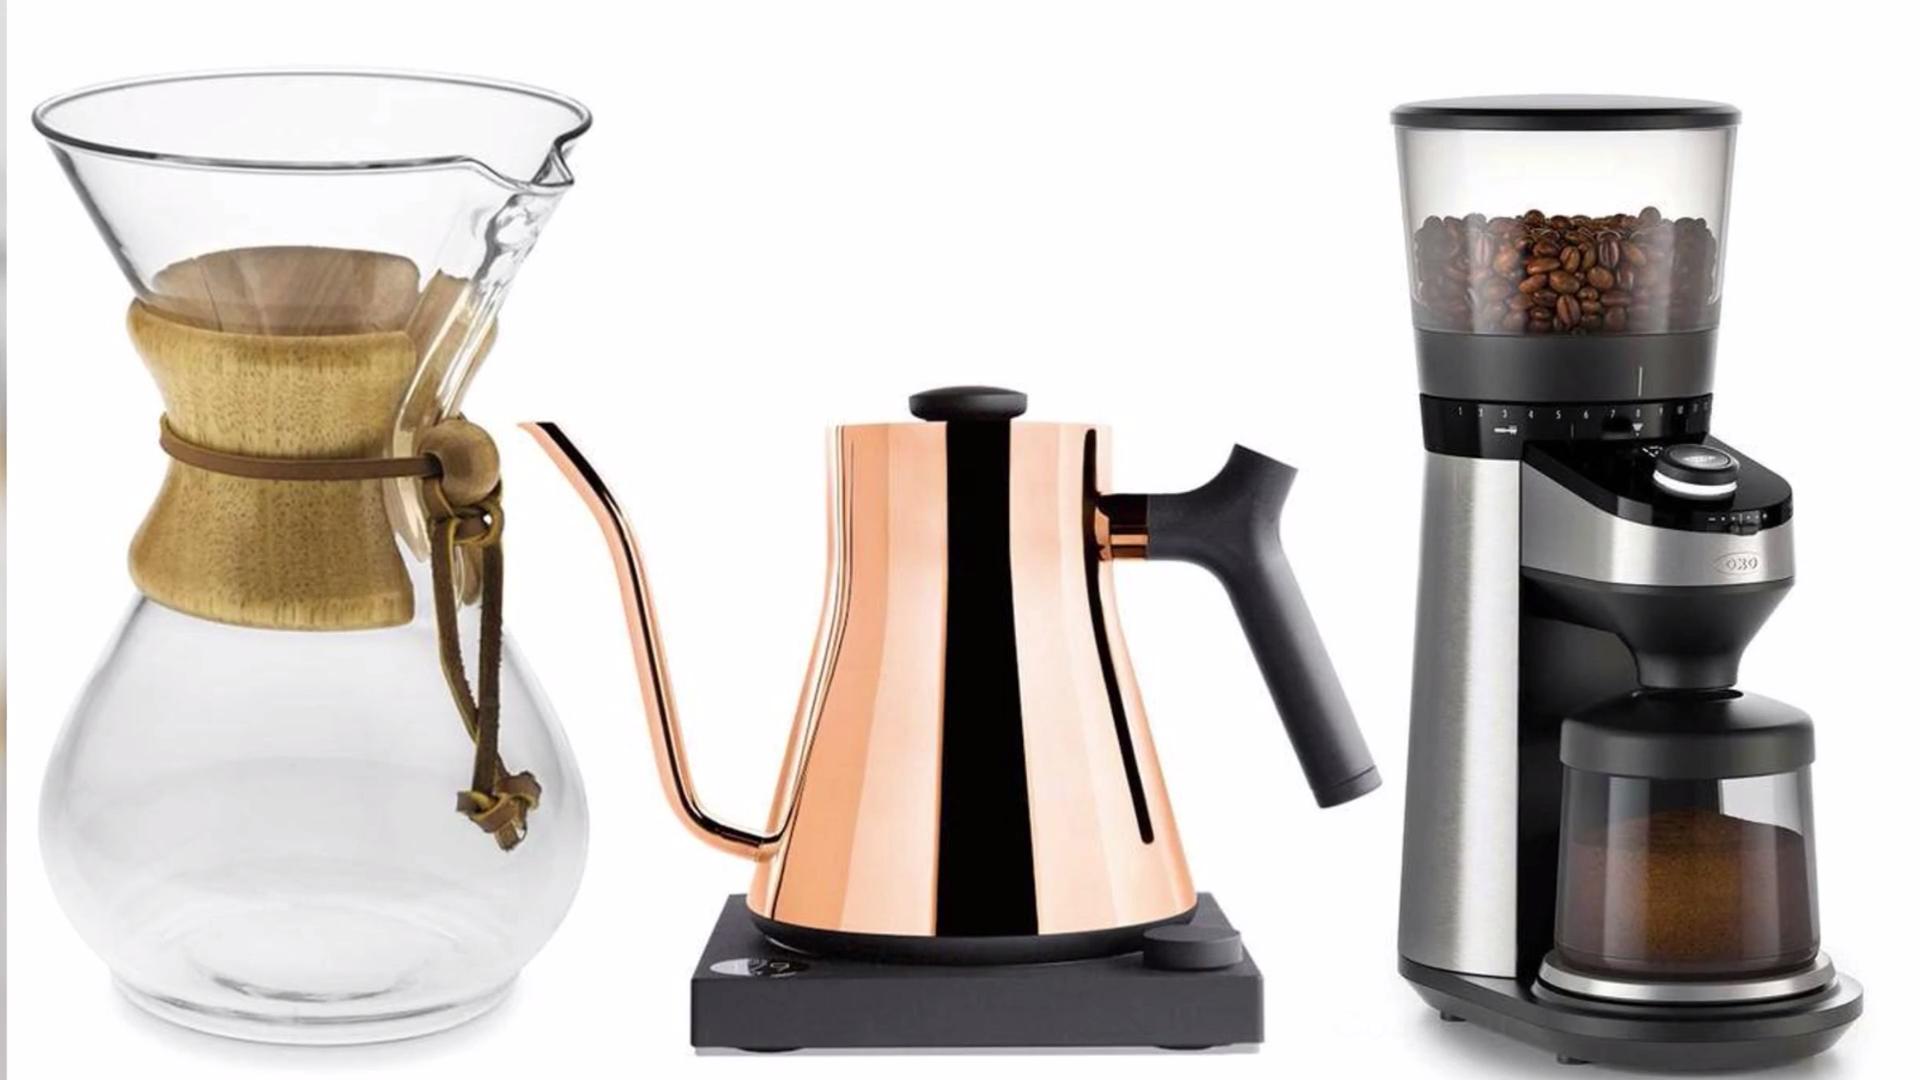 The Best Actually Useful High End Kitchen Gifts for 2018